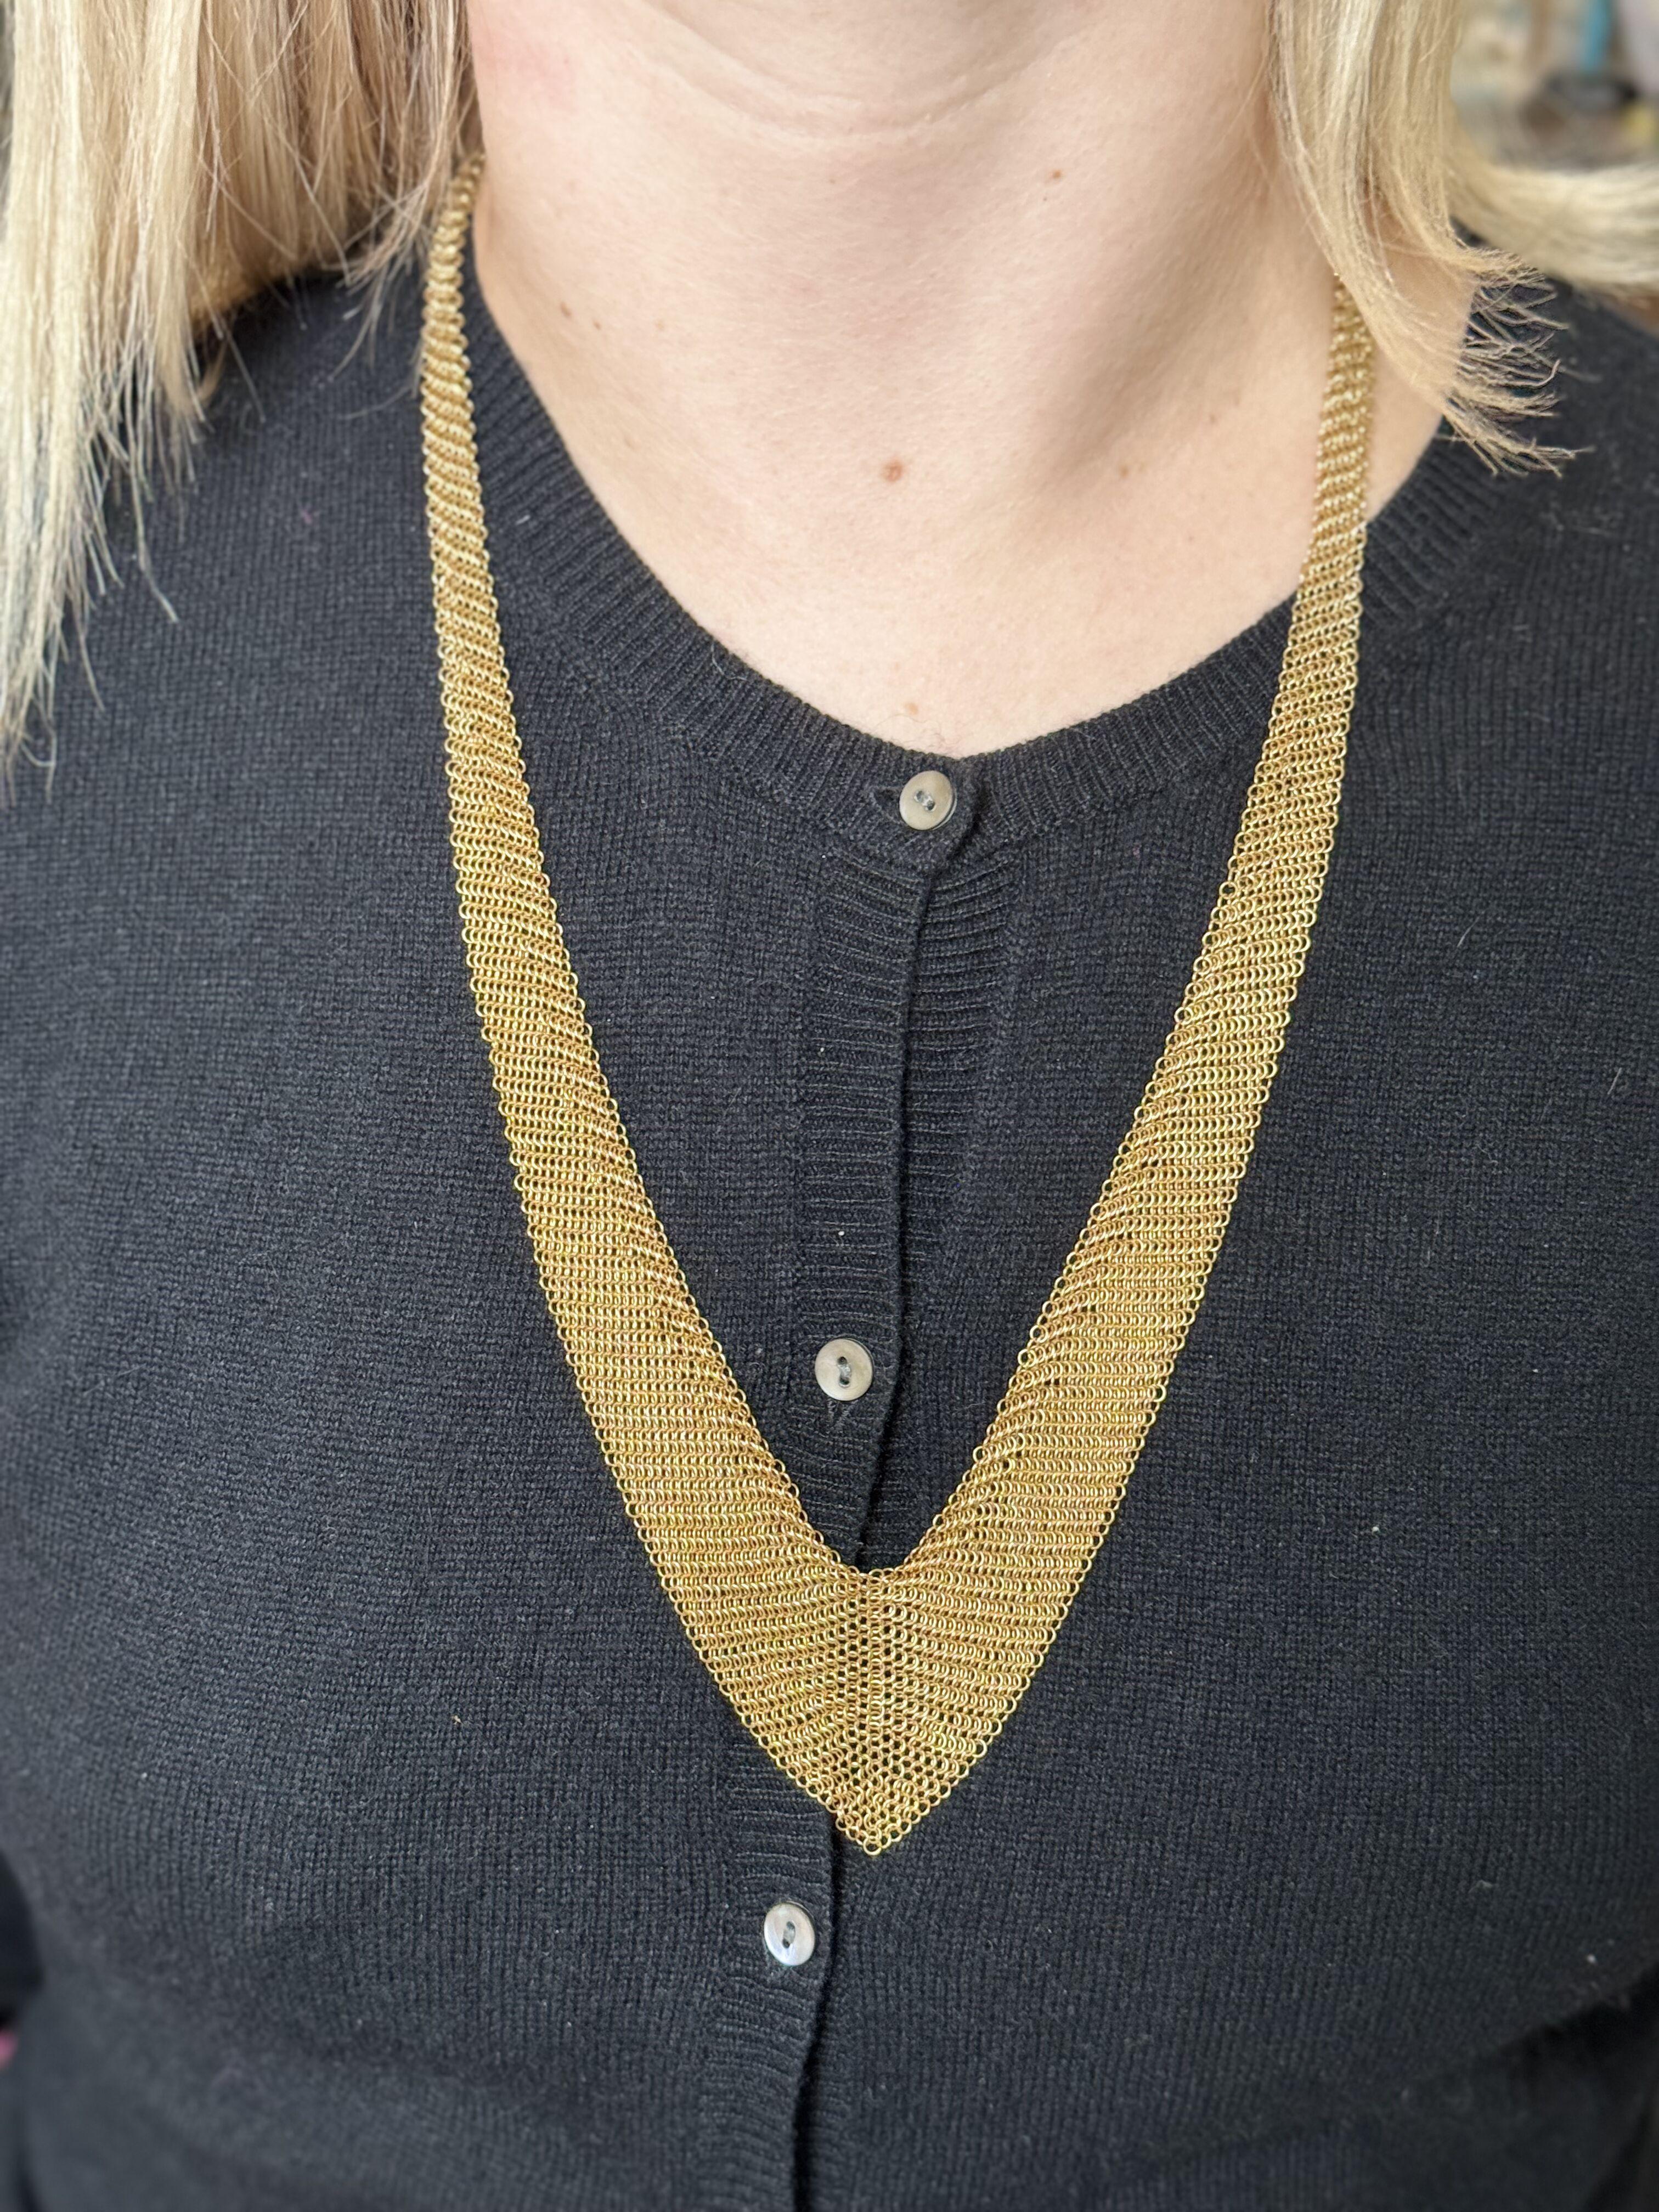 Iconic mesh scarf necklace, designed and created by Elsa Peretti for Tiffany & Co, in 18k yellow gold. Necklace is 27